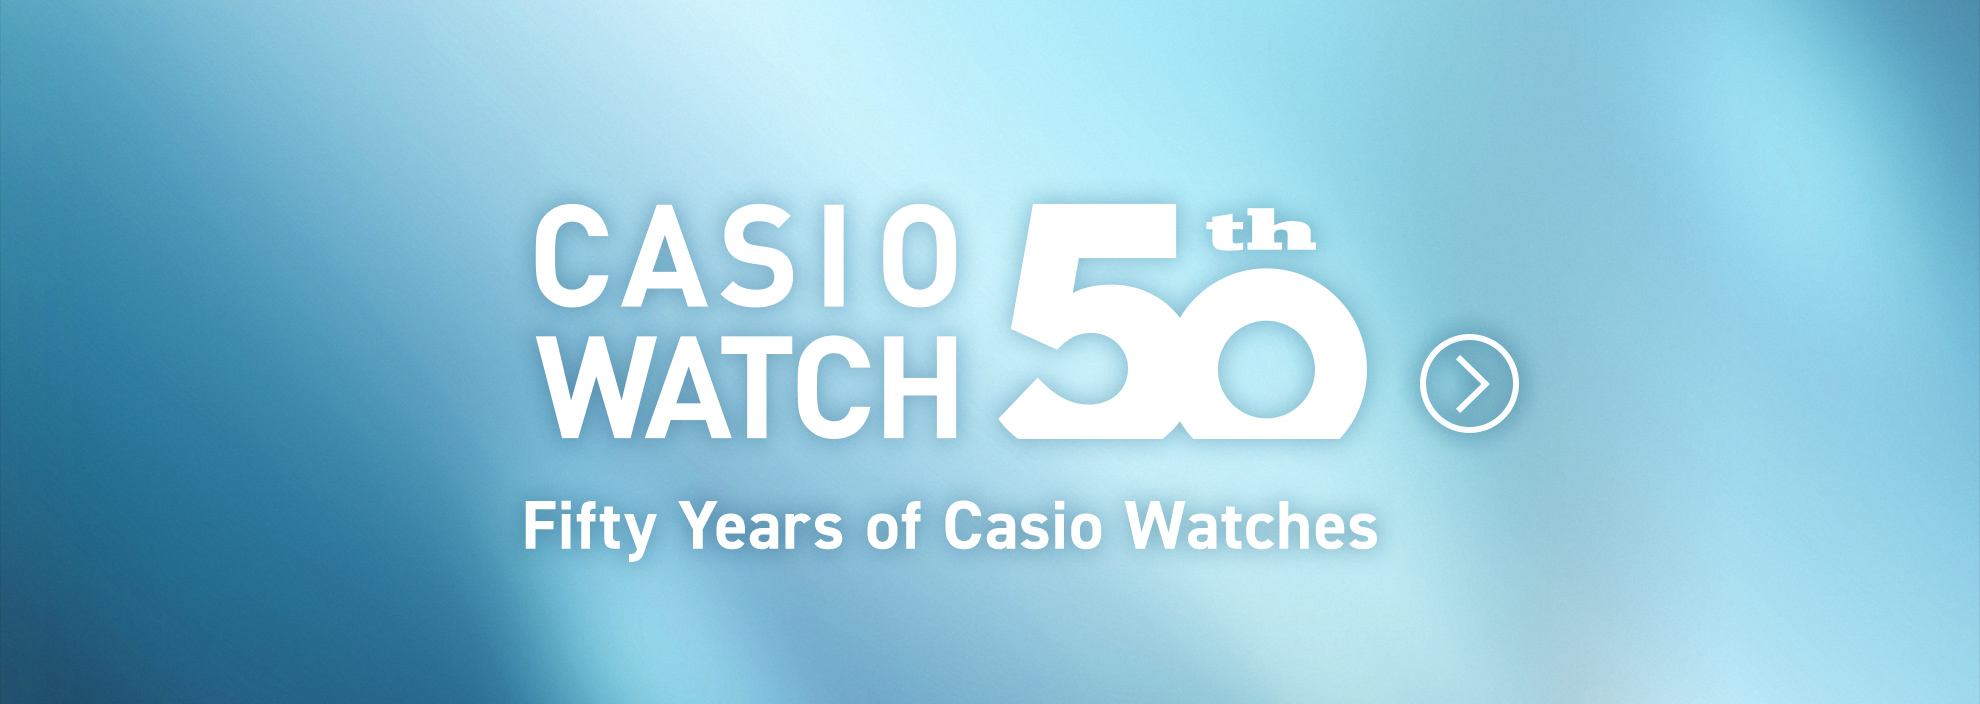 Fifty Years of Casio Watches